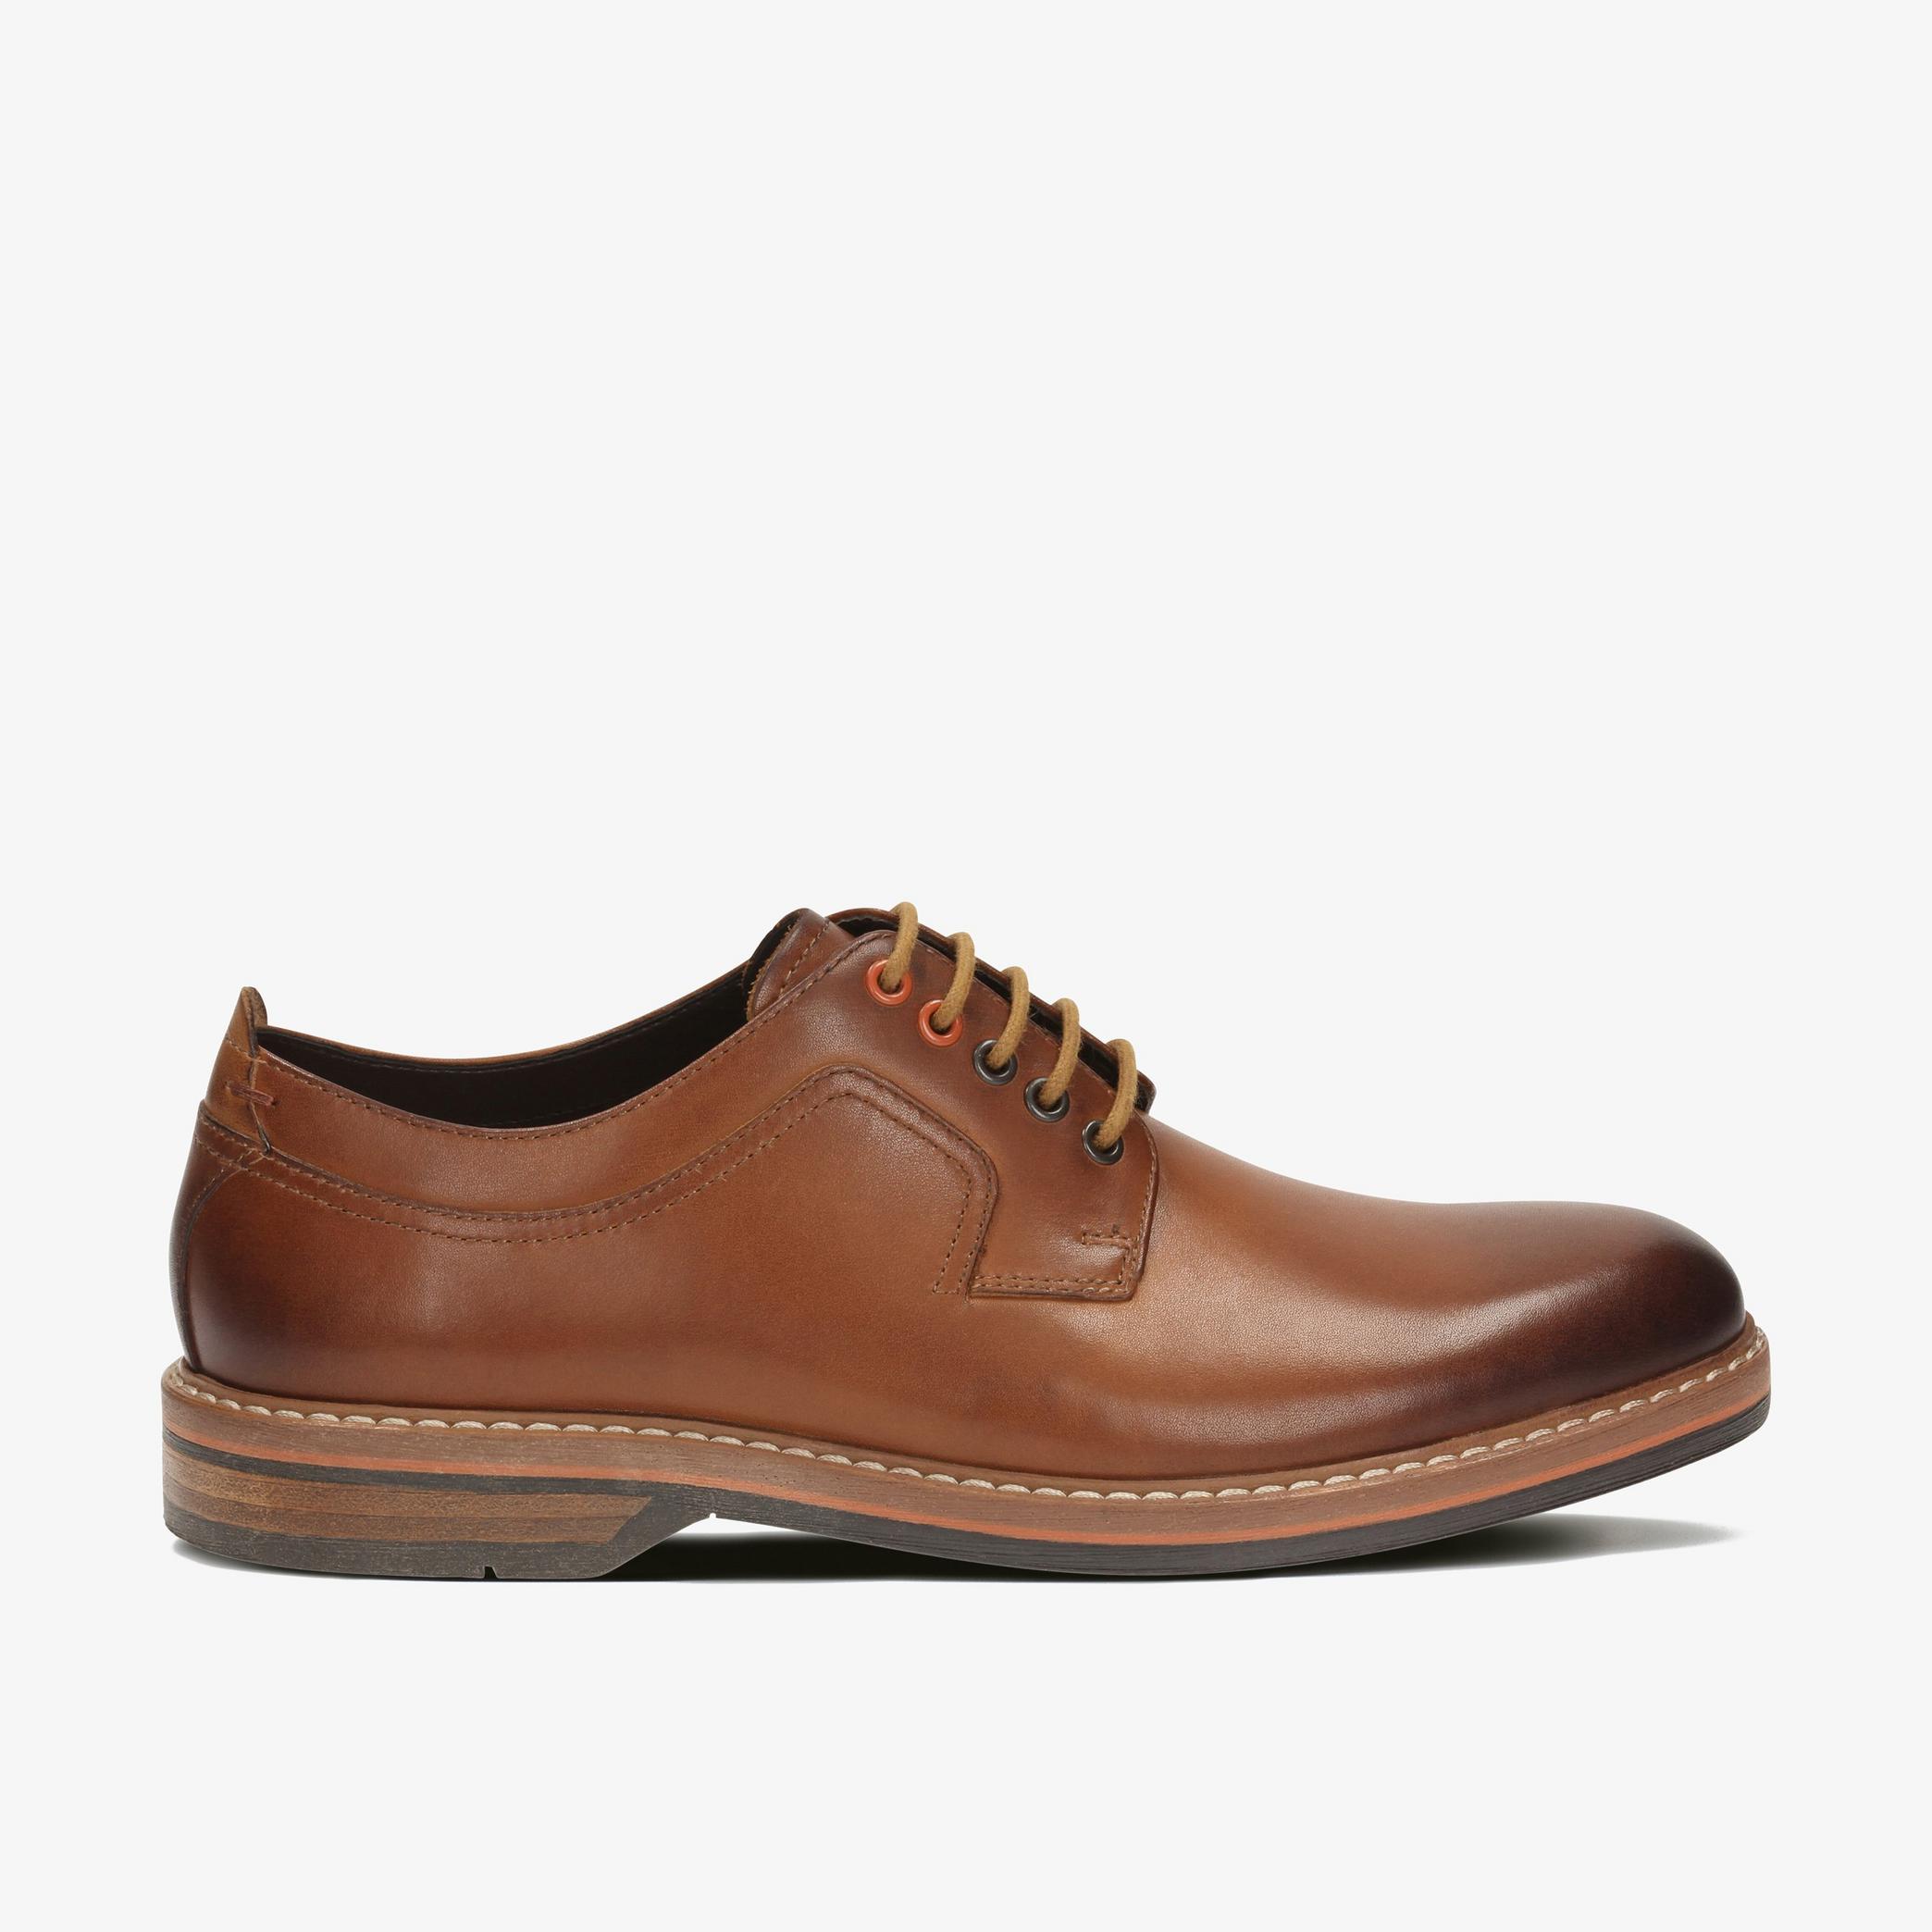 Pitney Walk Cognac Leather Shoes, view 1 of 5